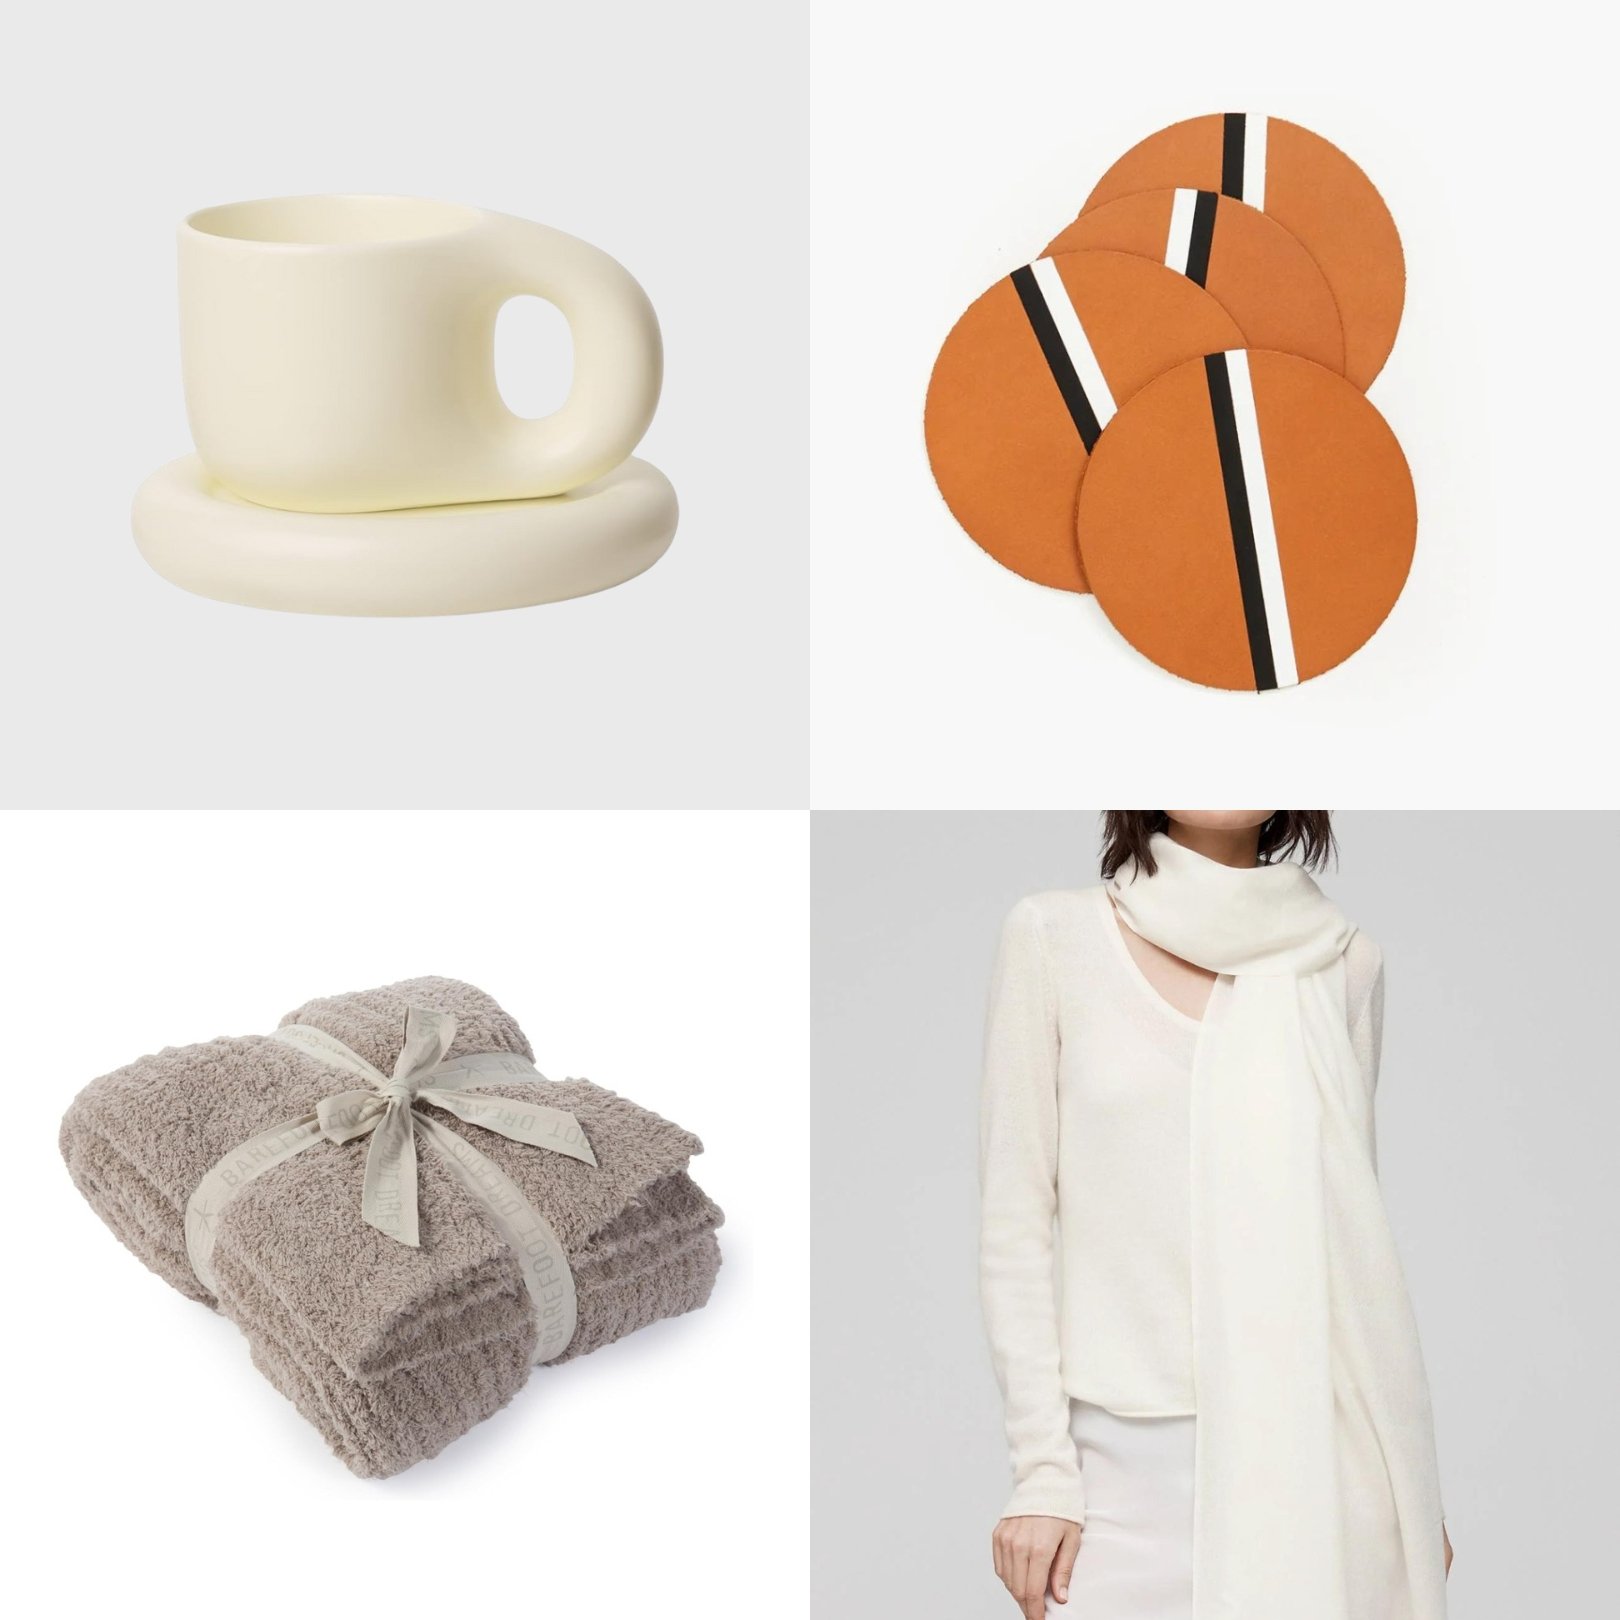 Gifts Under $30 for Men and Women - Jeans and a Teacup